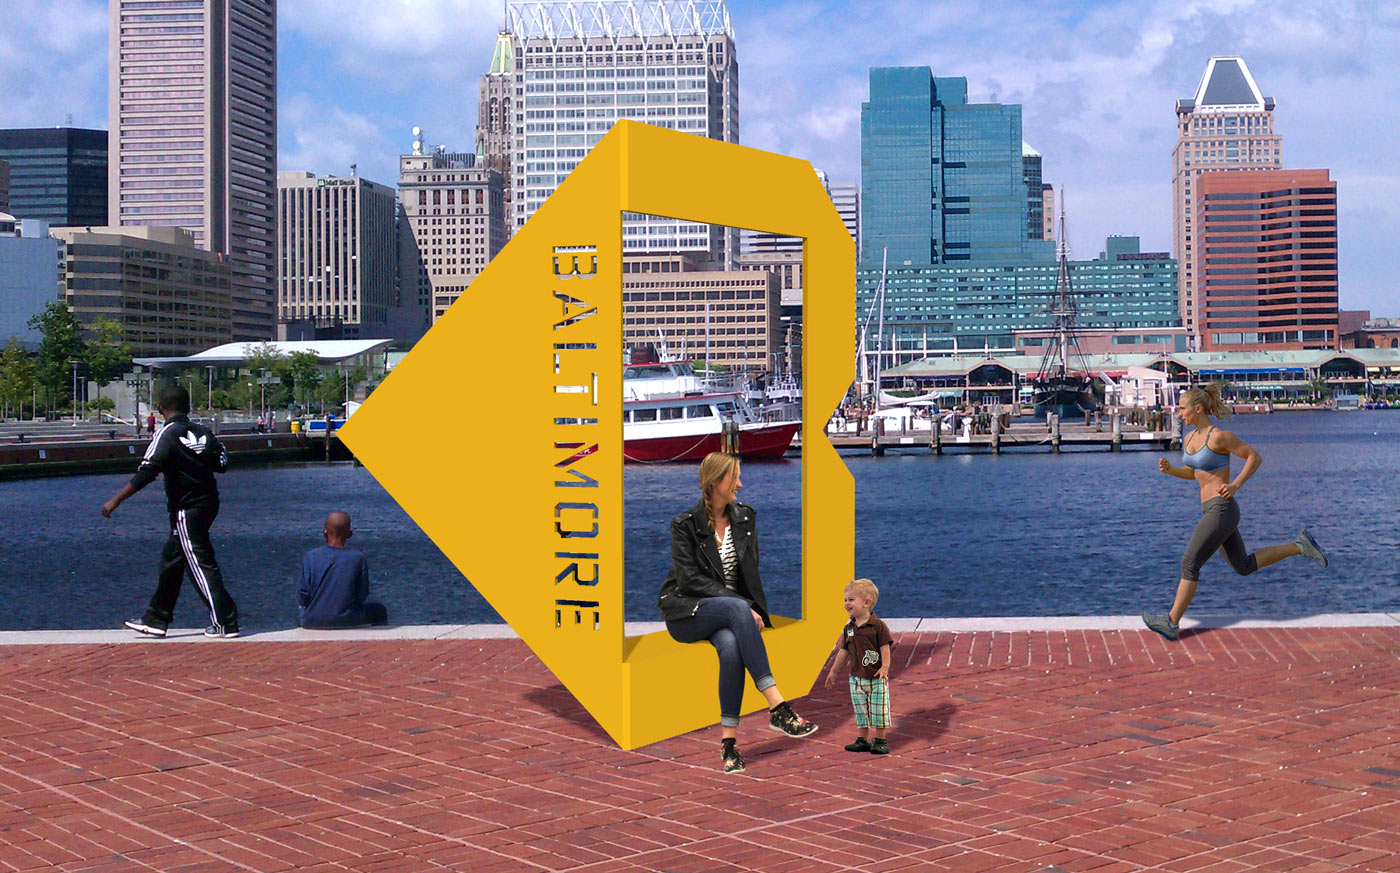 Photo rendering of a new sculptural B-shaped benches proposed as part of a new brand for the city of Baltimore